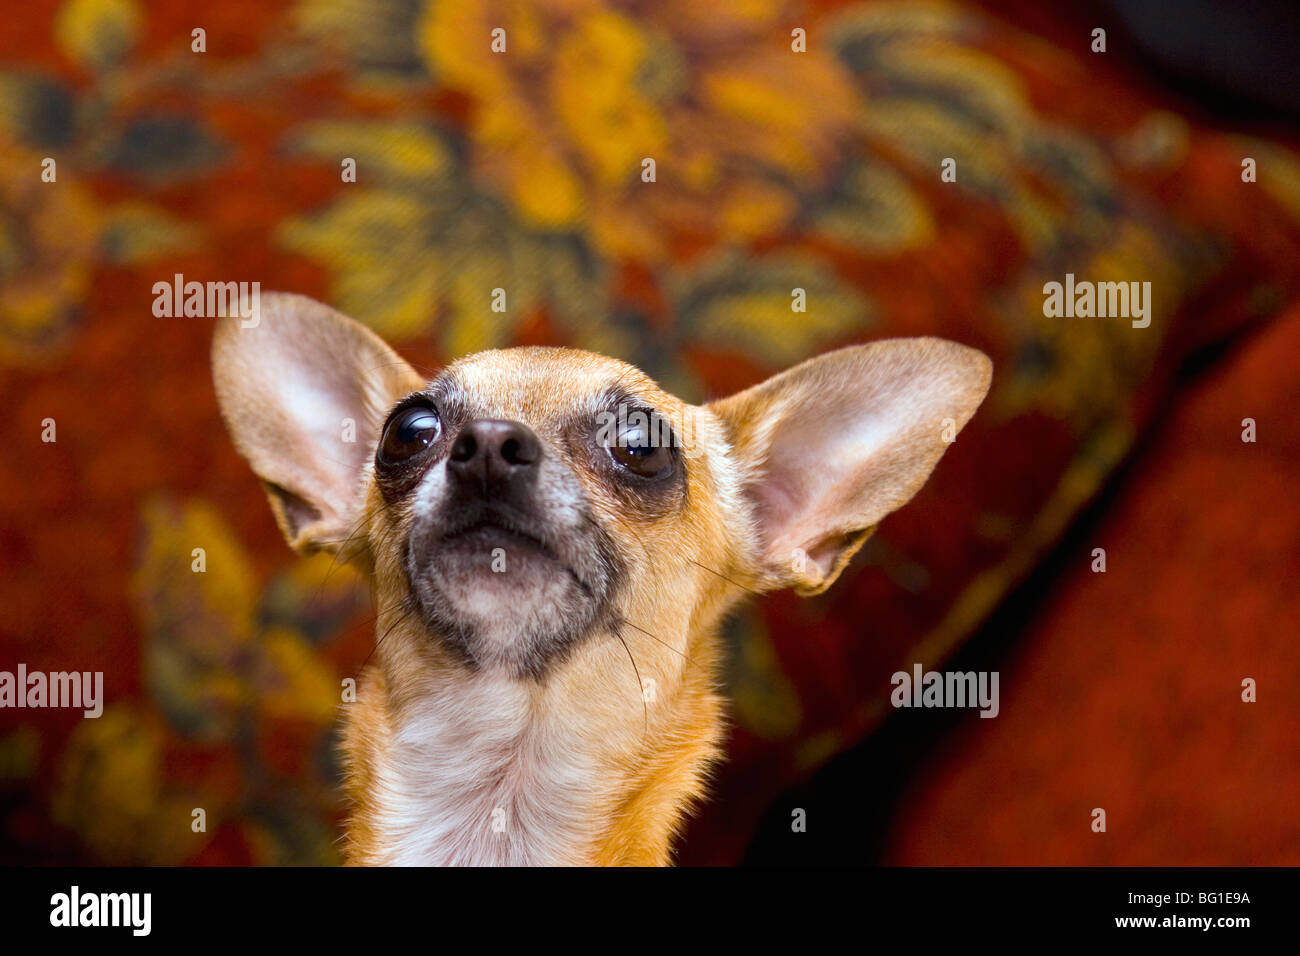 Chihuahua dog looking up Banque D'Images